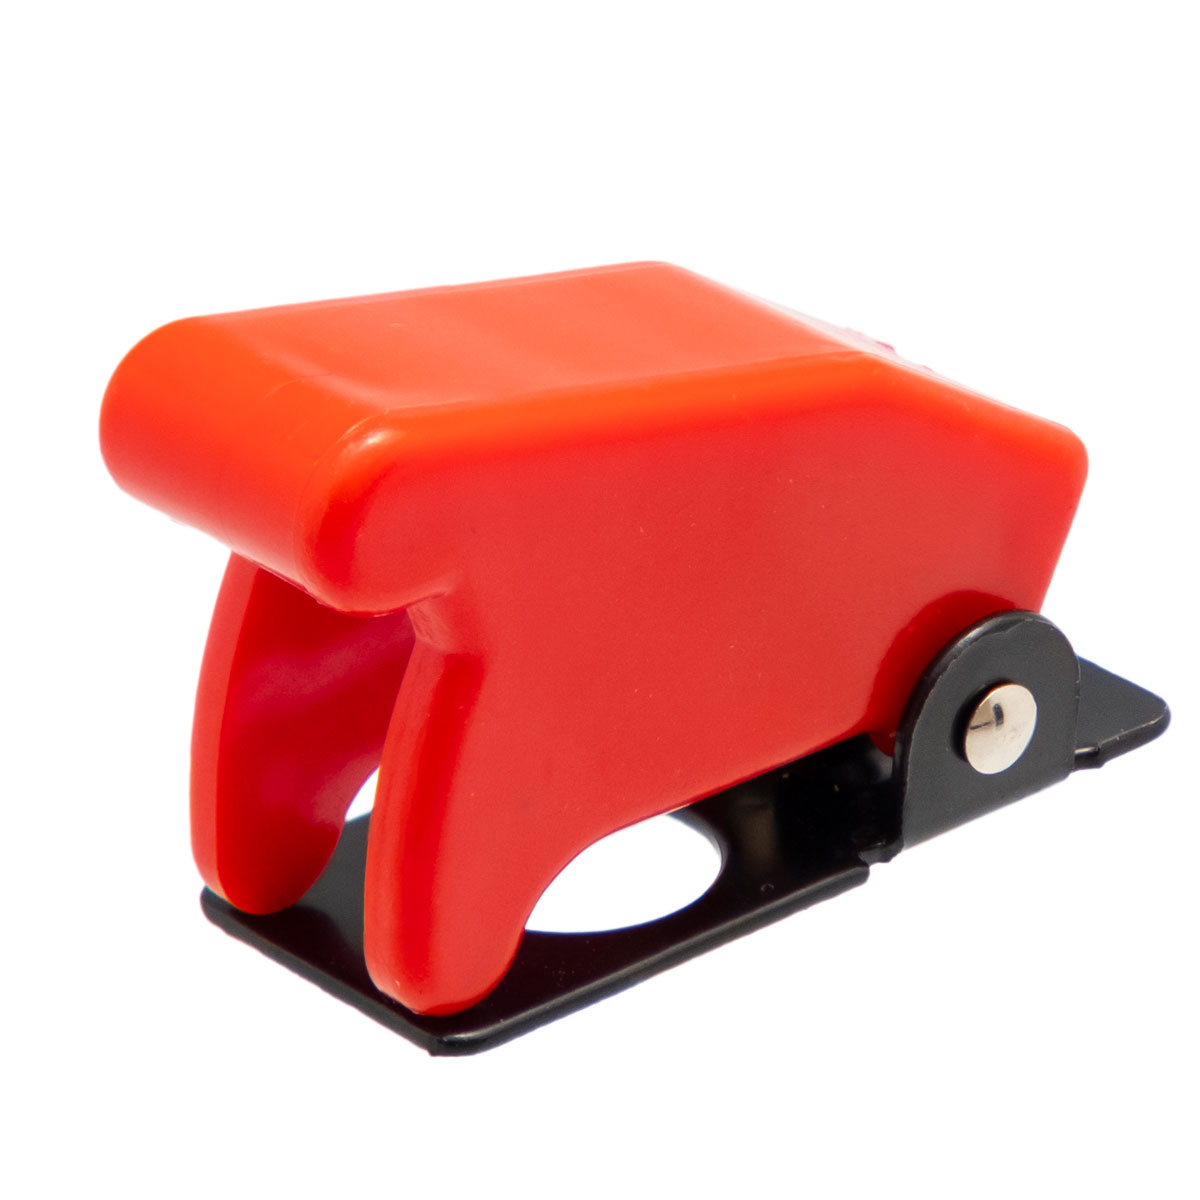 Toggle Switch Cap Safety Guard, red